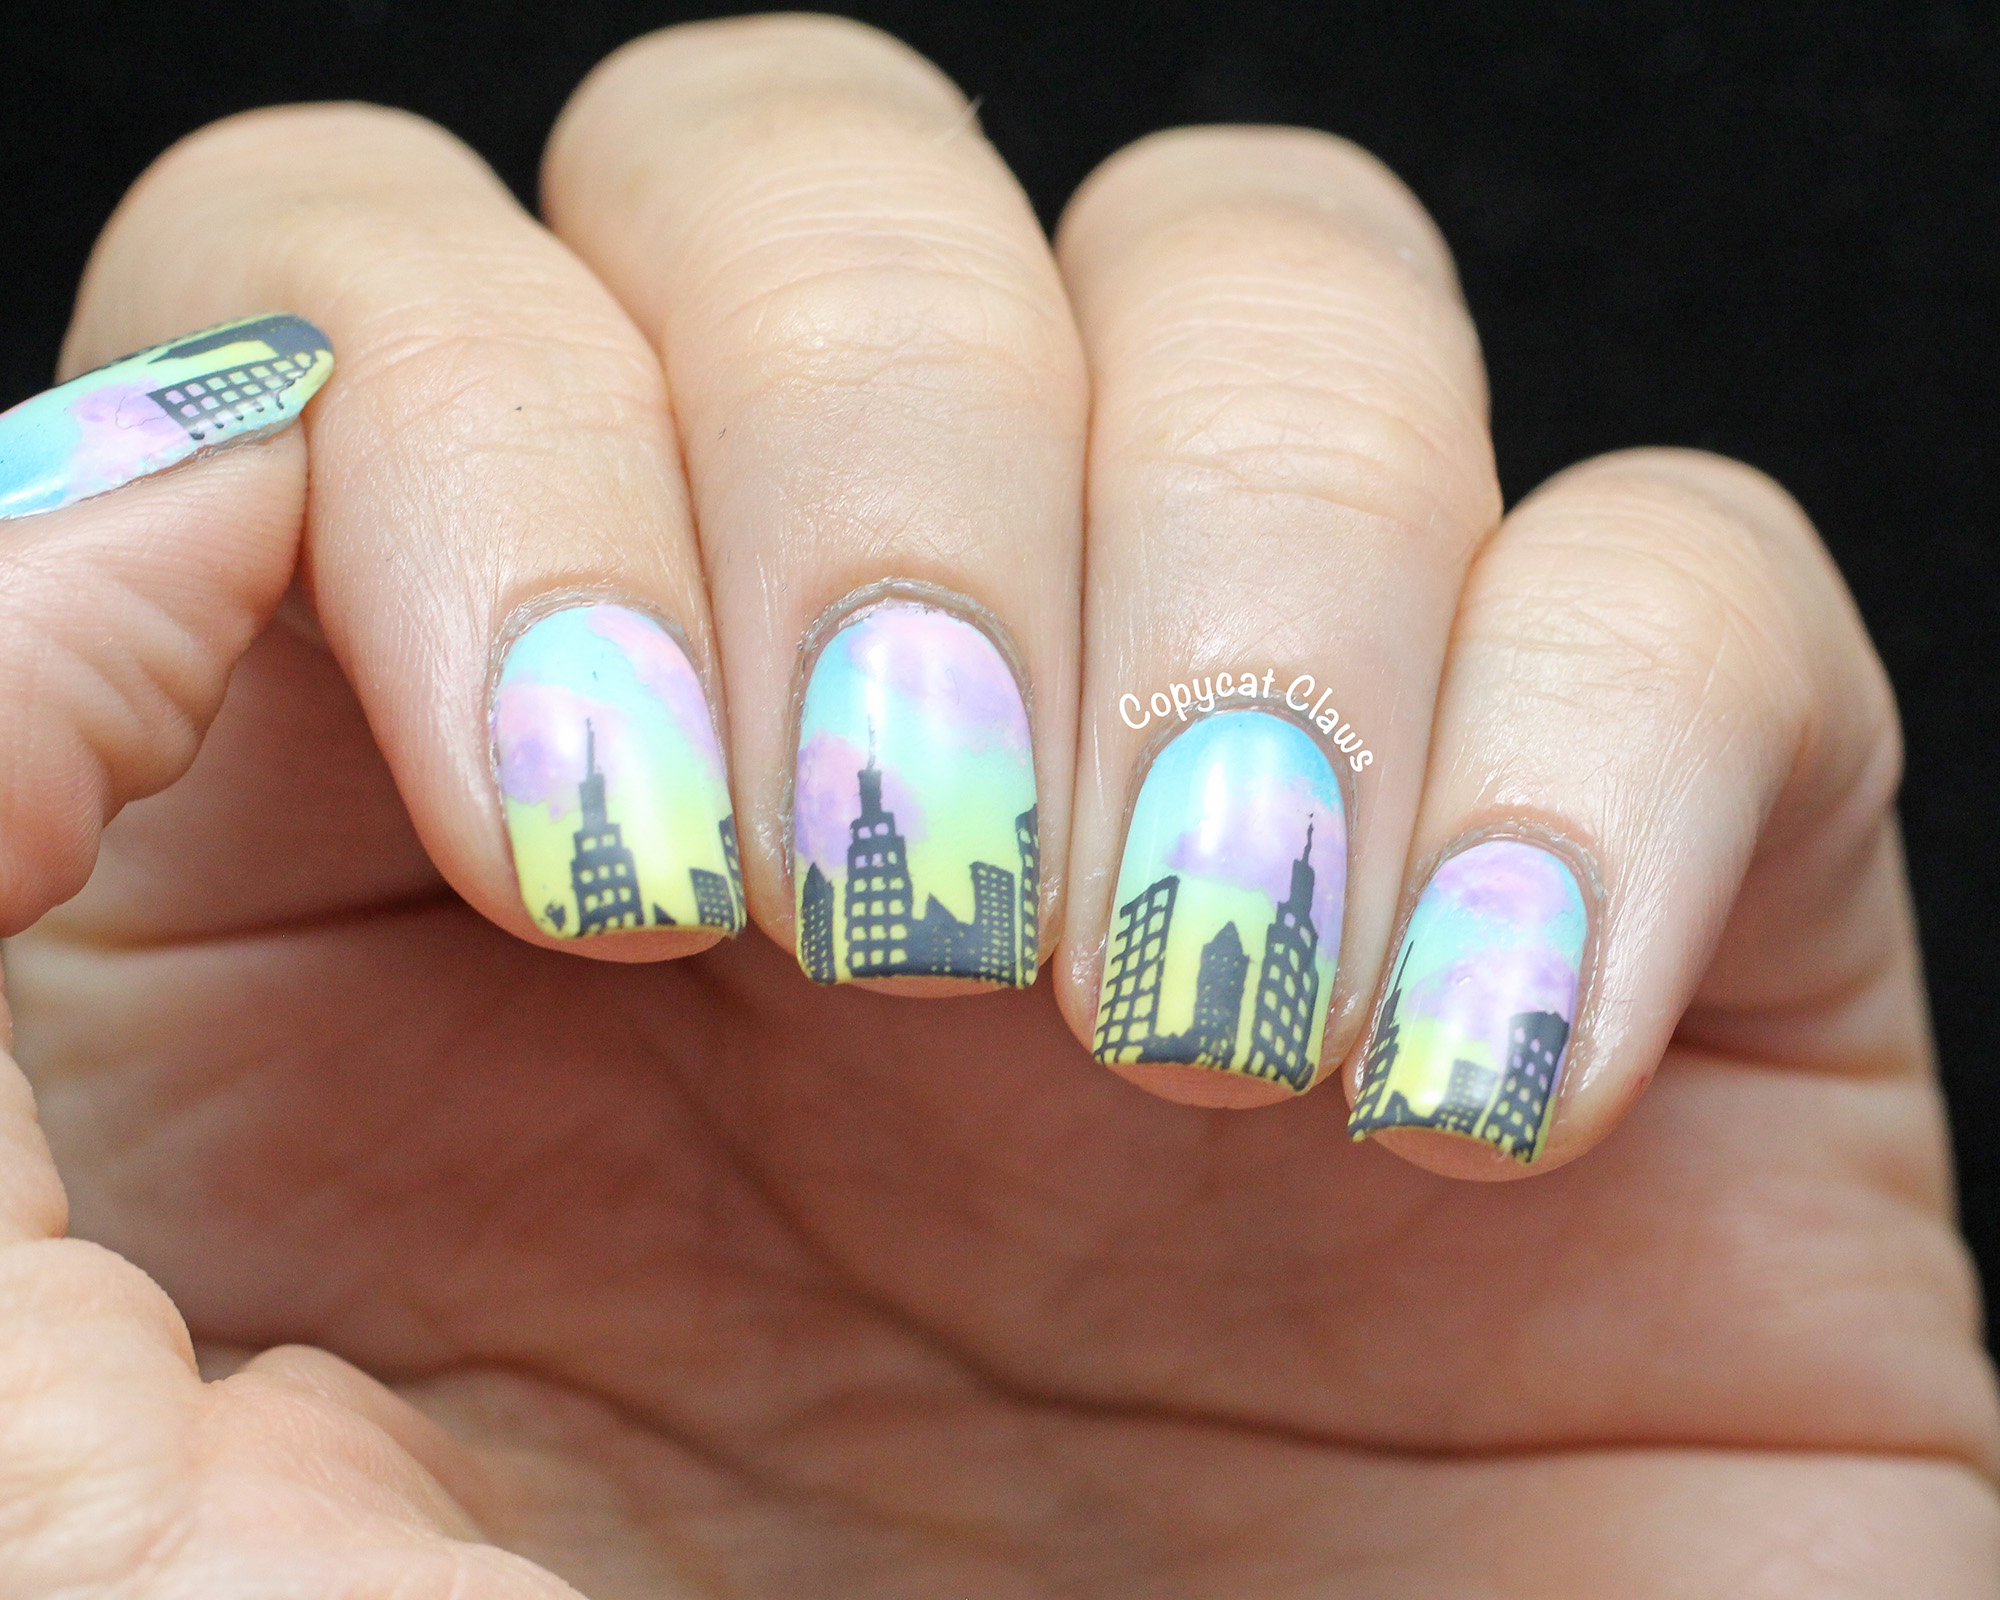 5. "NYC Skyline Nail Stamping" - wide 4